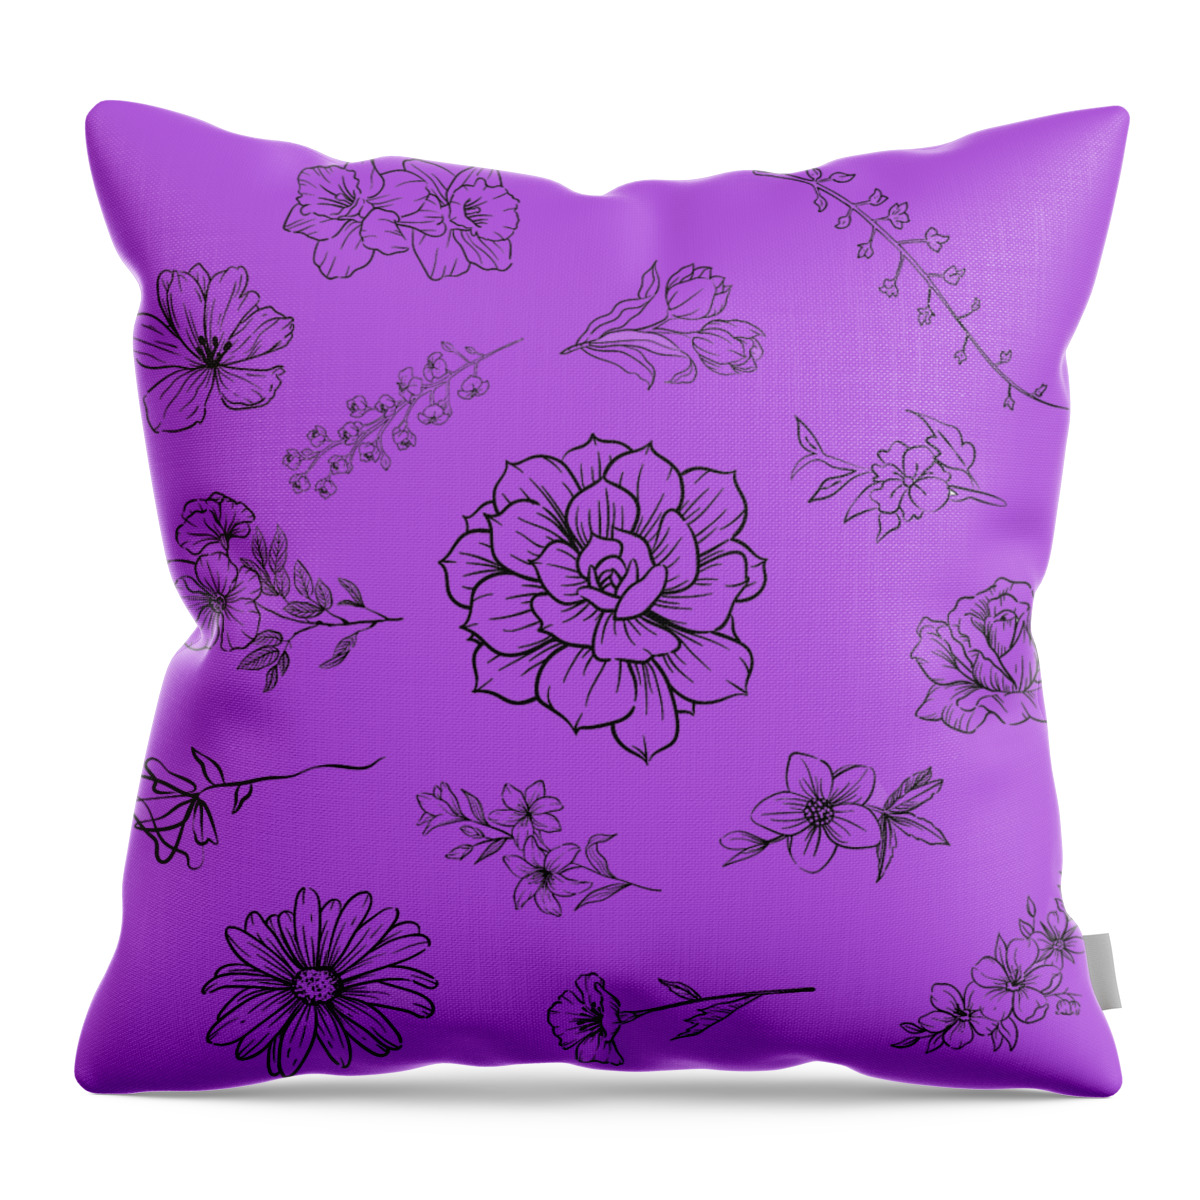 Flowers Throw Pillow featuring the digital art Black and White Floral Pattern With Transparent Background by Ali Baucom